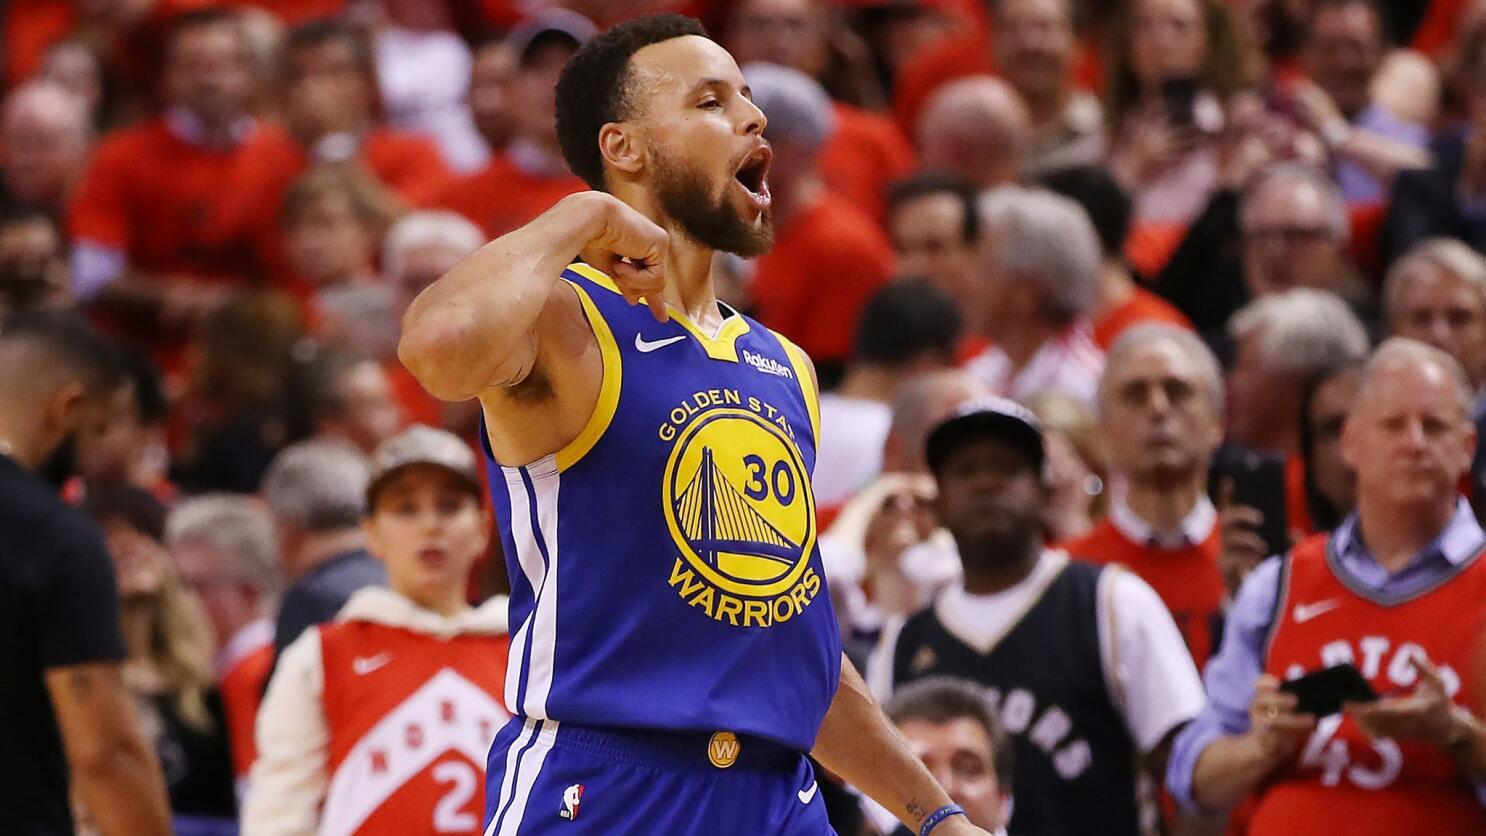 N.B.A. Finals: Stephen Curry and Warriors Aren't Short on Big